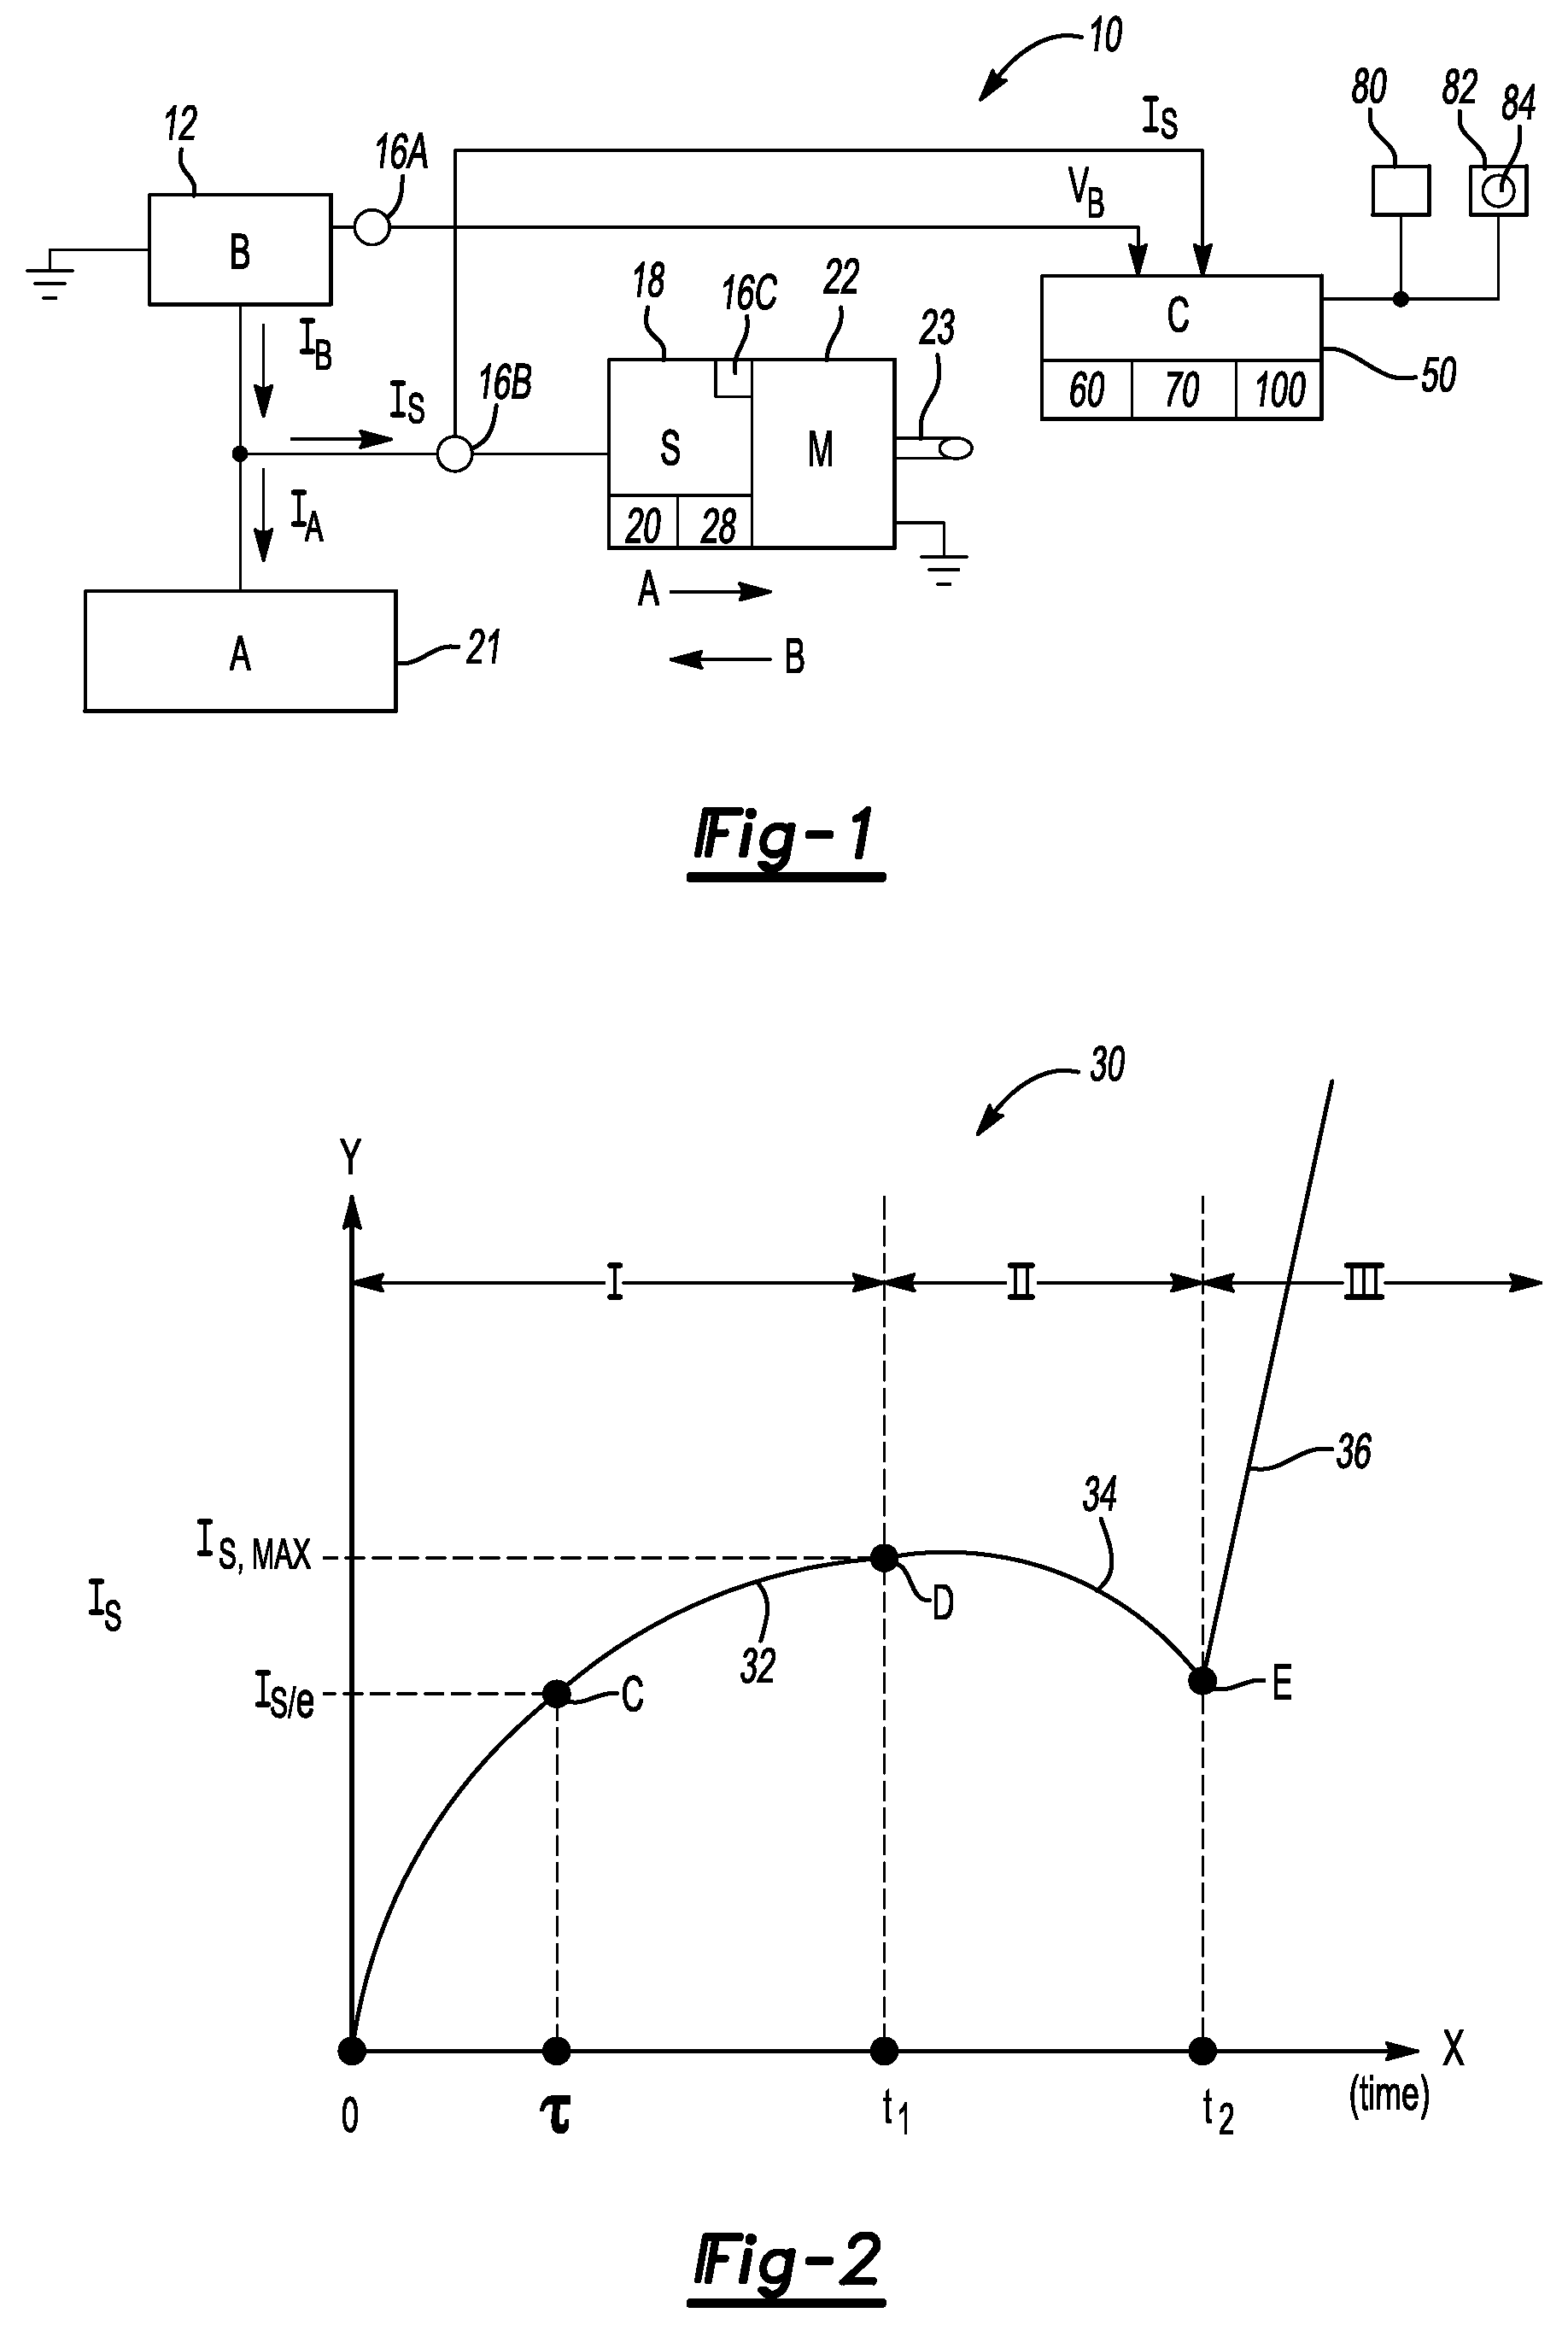 Method and apparatus for monitoring solenoid health